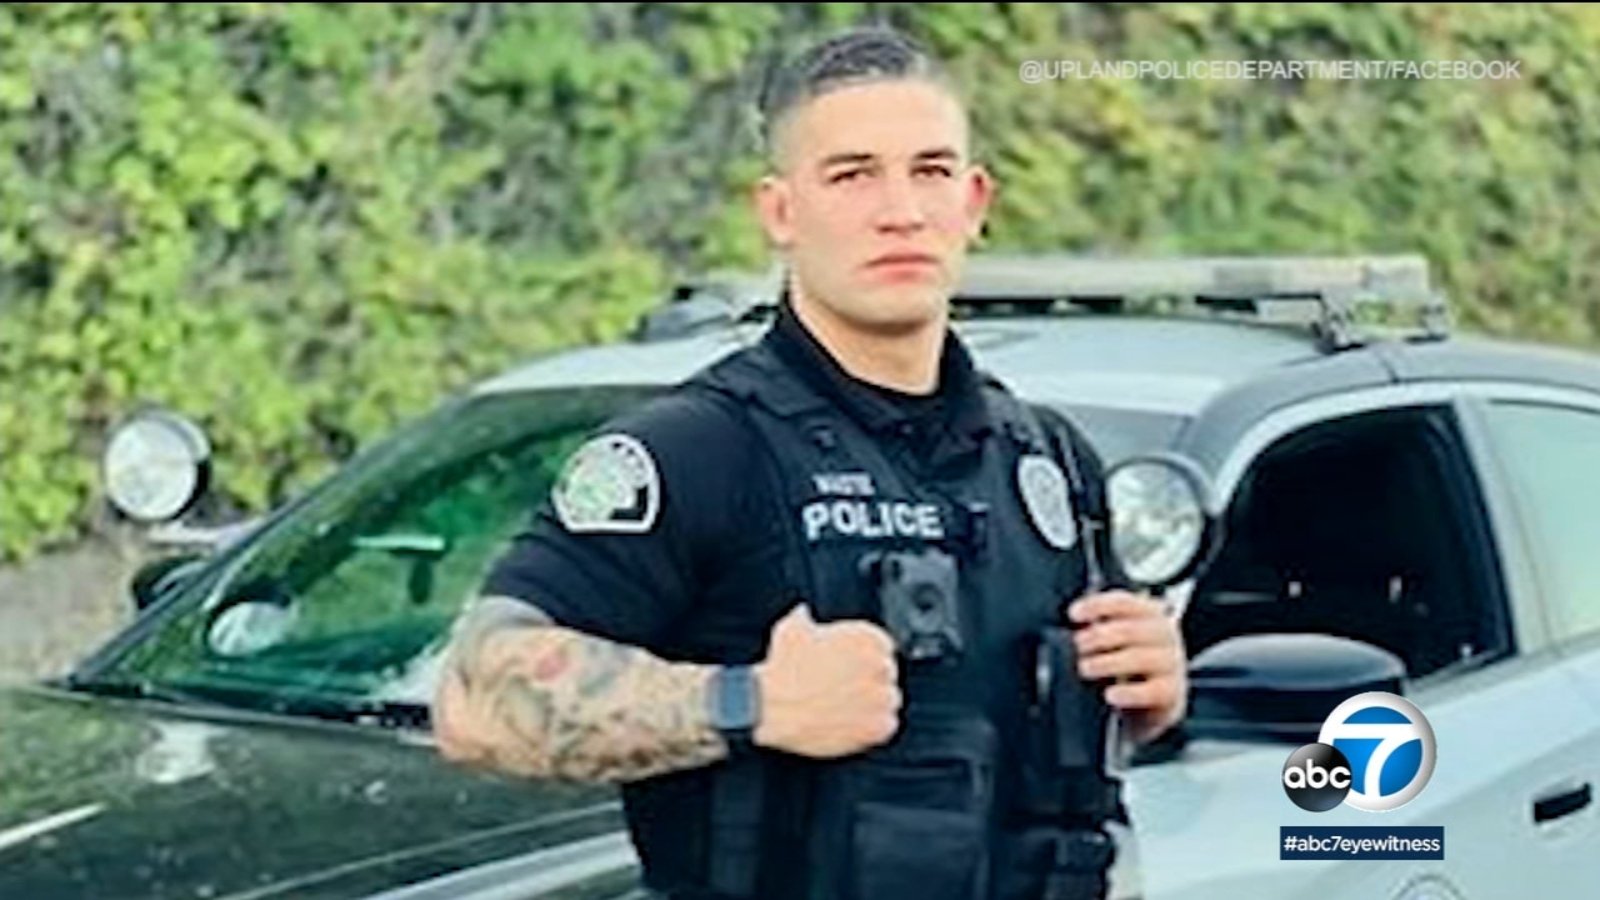 Upland police officer getting plenty of looks after recruitment post ...